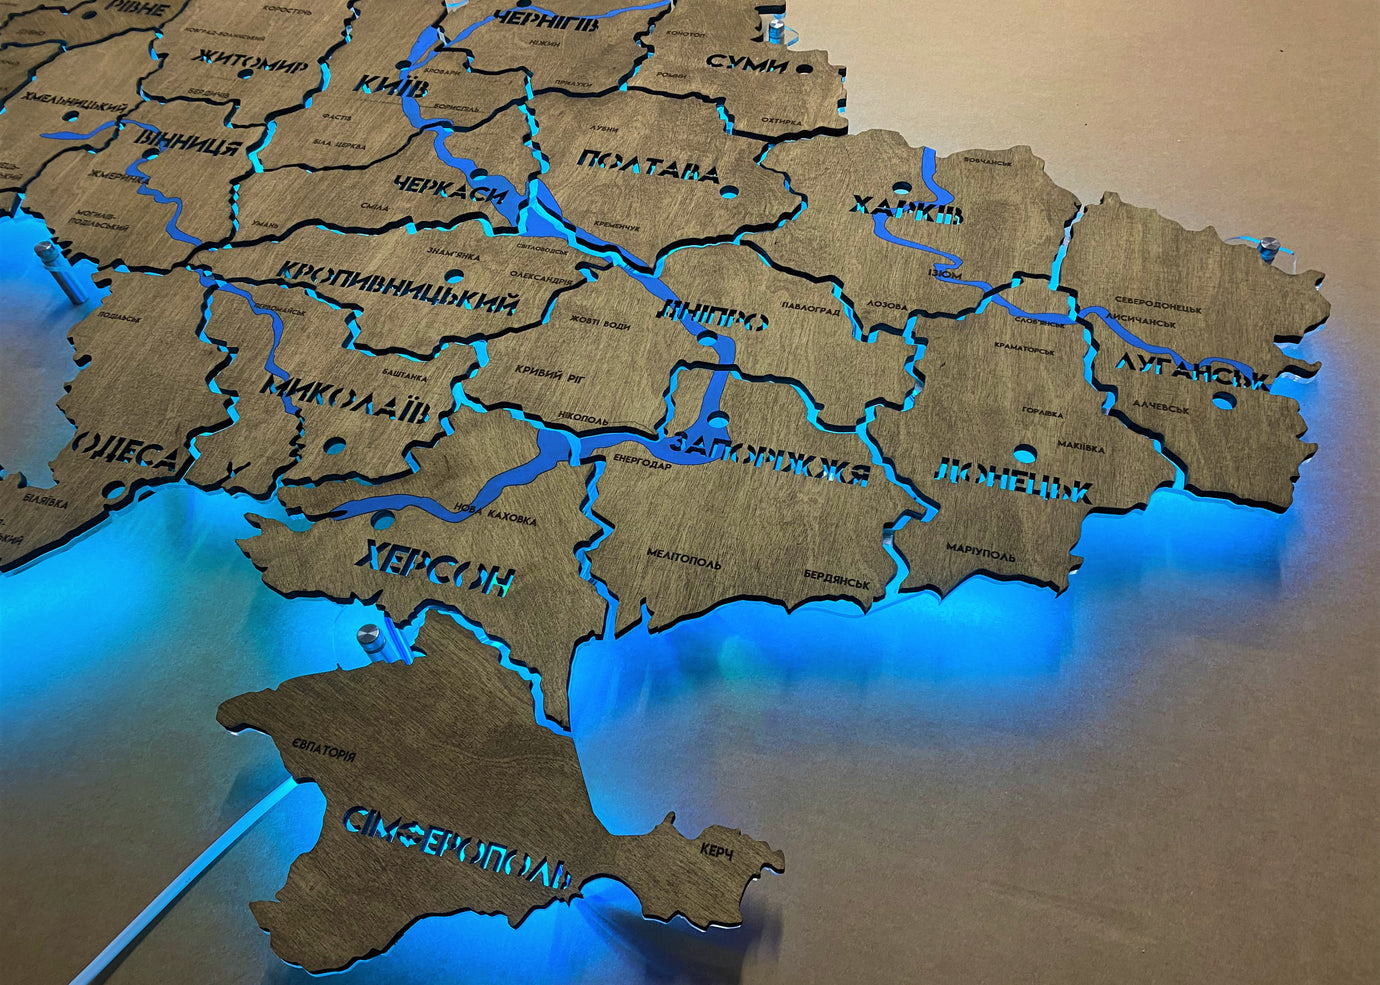 Ukraine LED RGB map on acrylic glass with rivers and backlighting  between regions color Venge 1